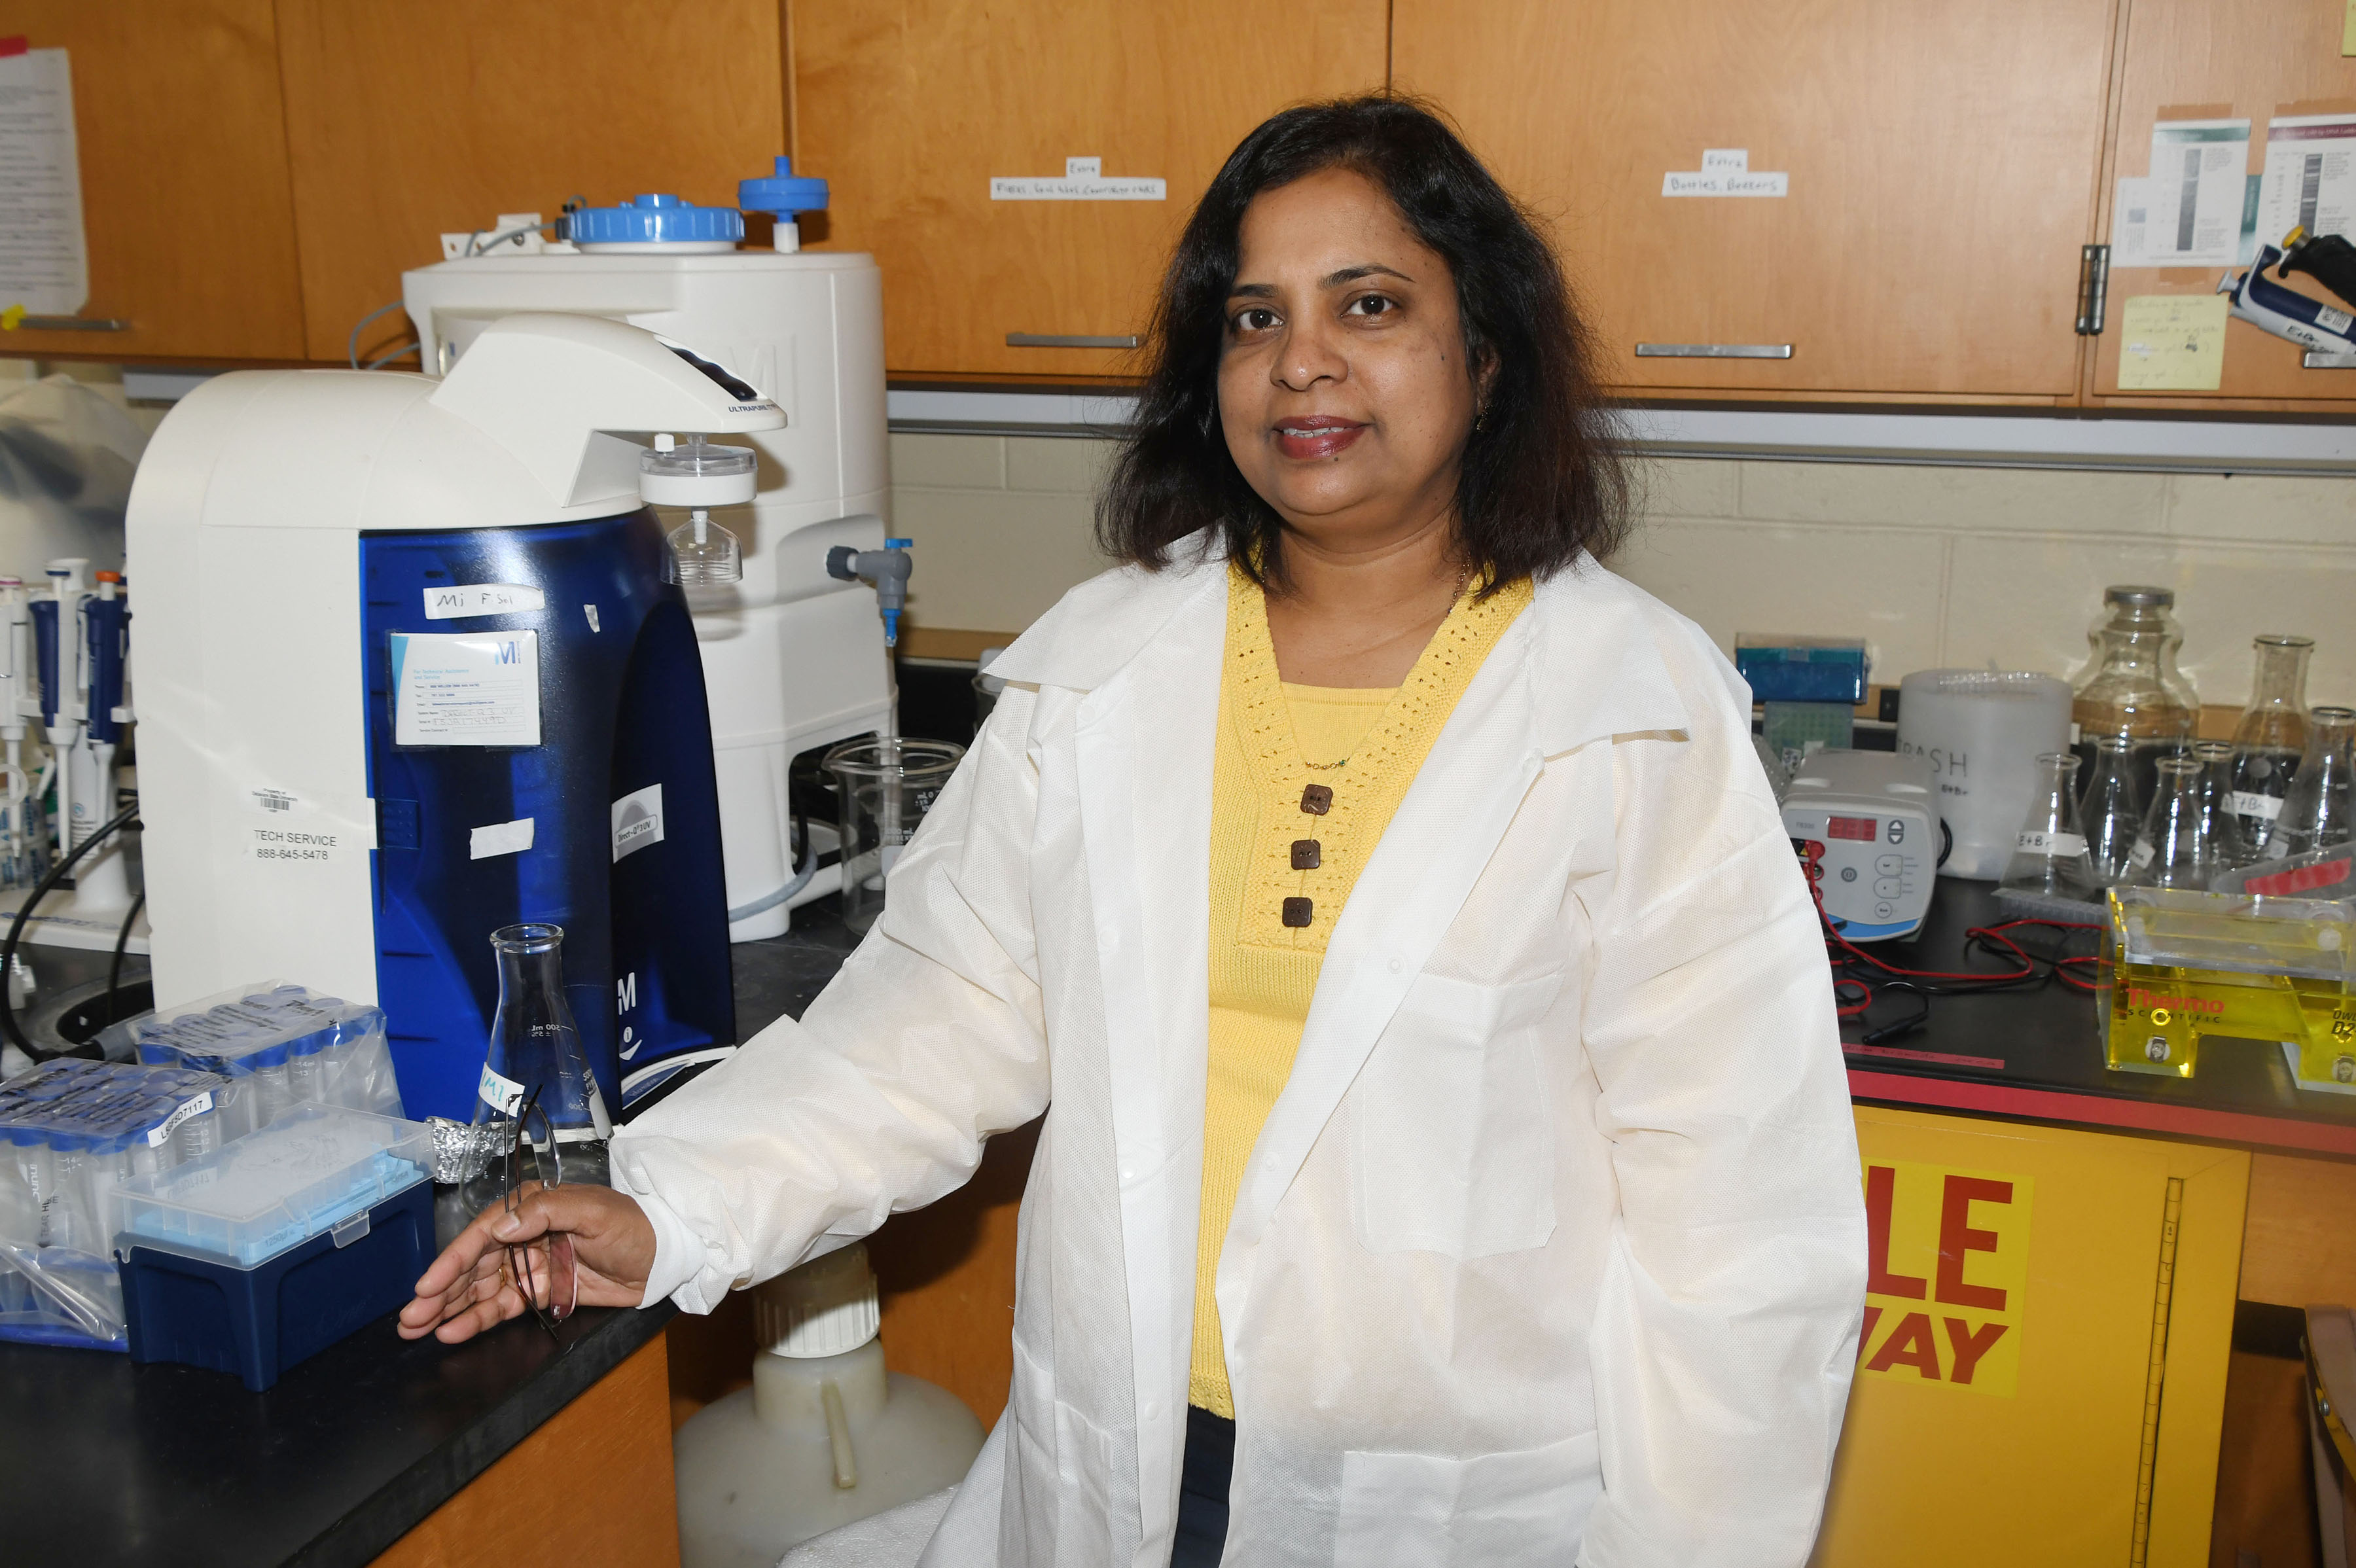 Dr. Kalpalatha Melmaiee, Associate Professor of Agricultural and Natural Resources, is among several women scientists celebrated as part of the March 8 International Women’s Day.